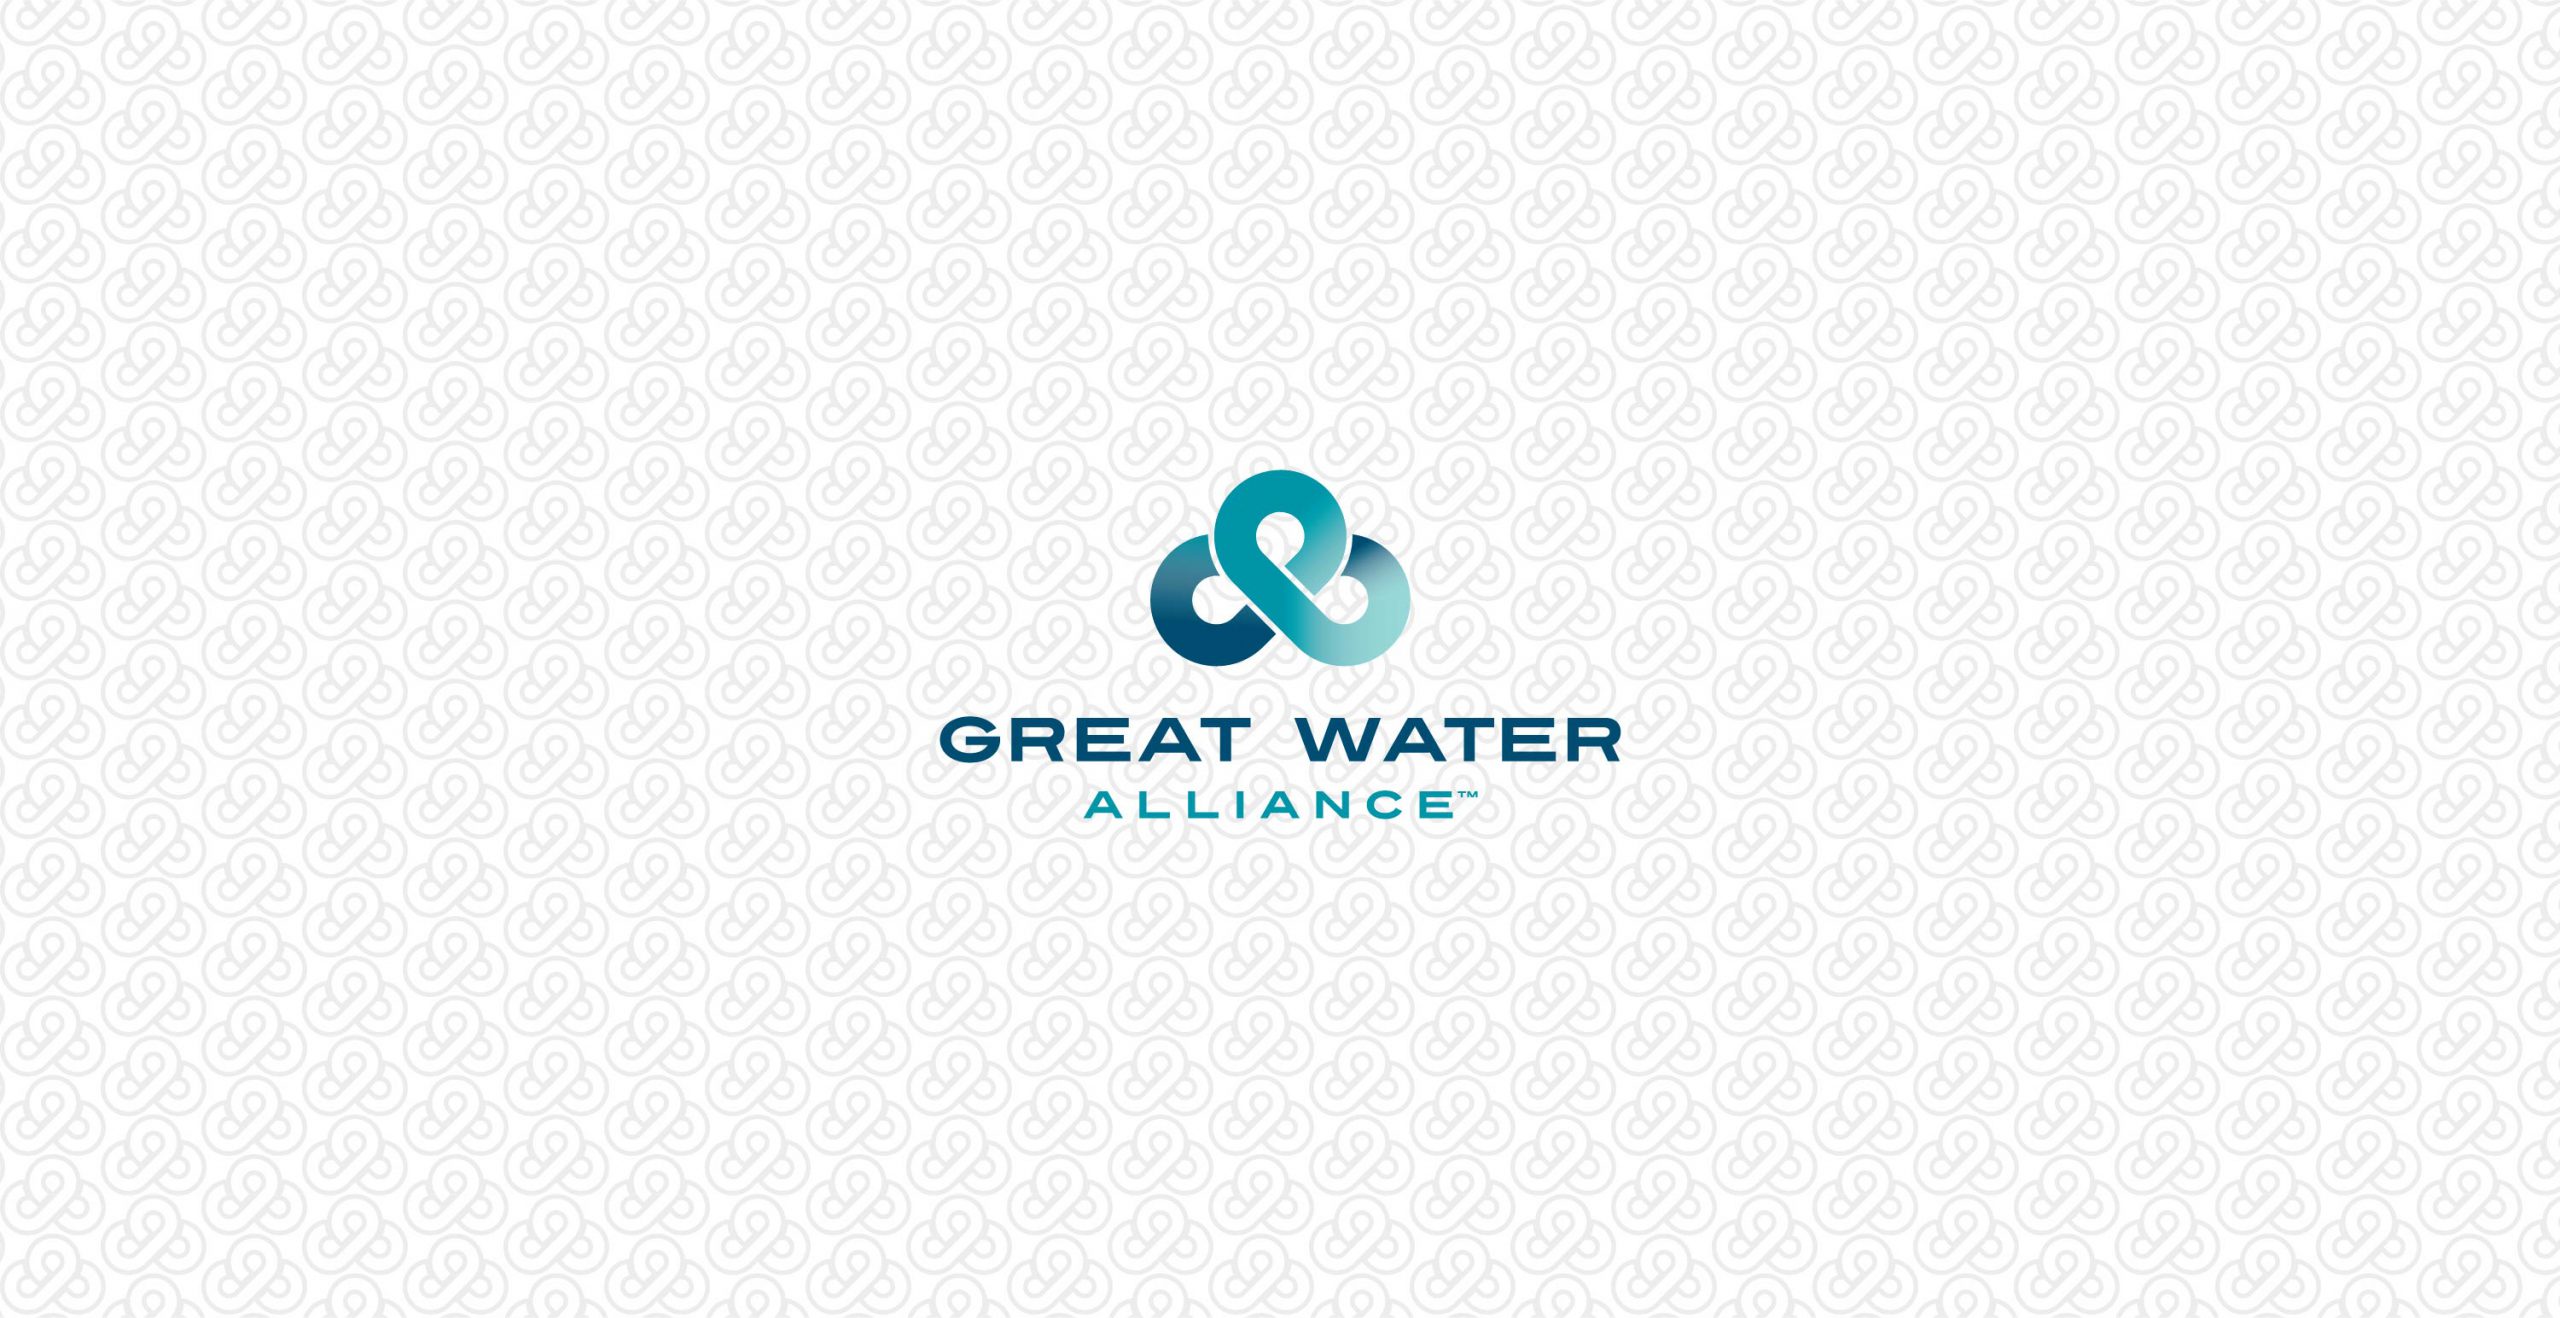 Great Water Alliance - logo on background